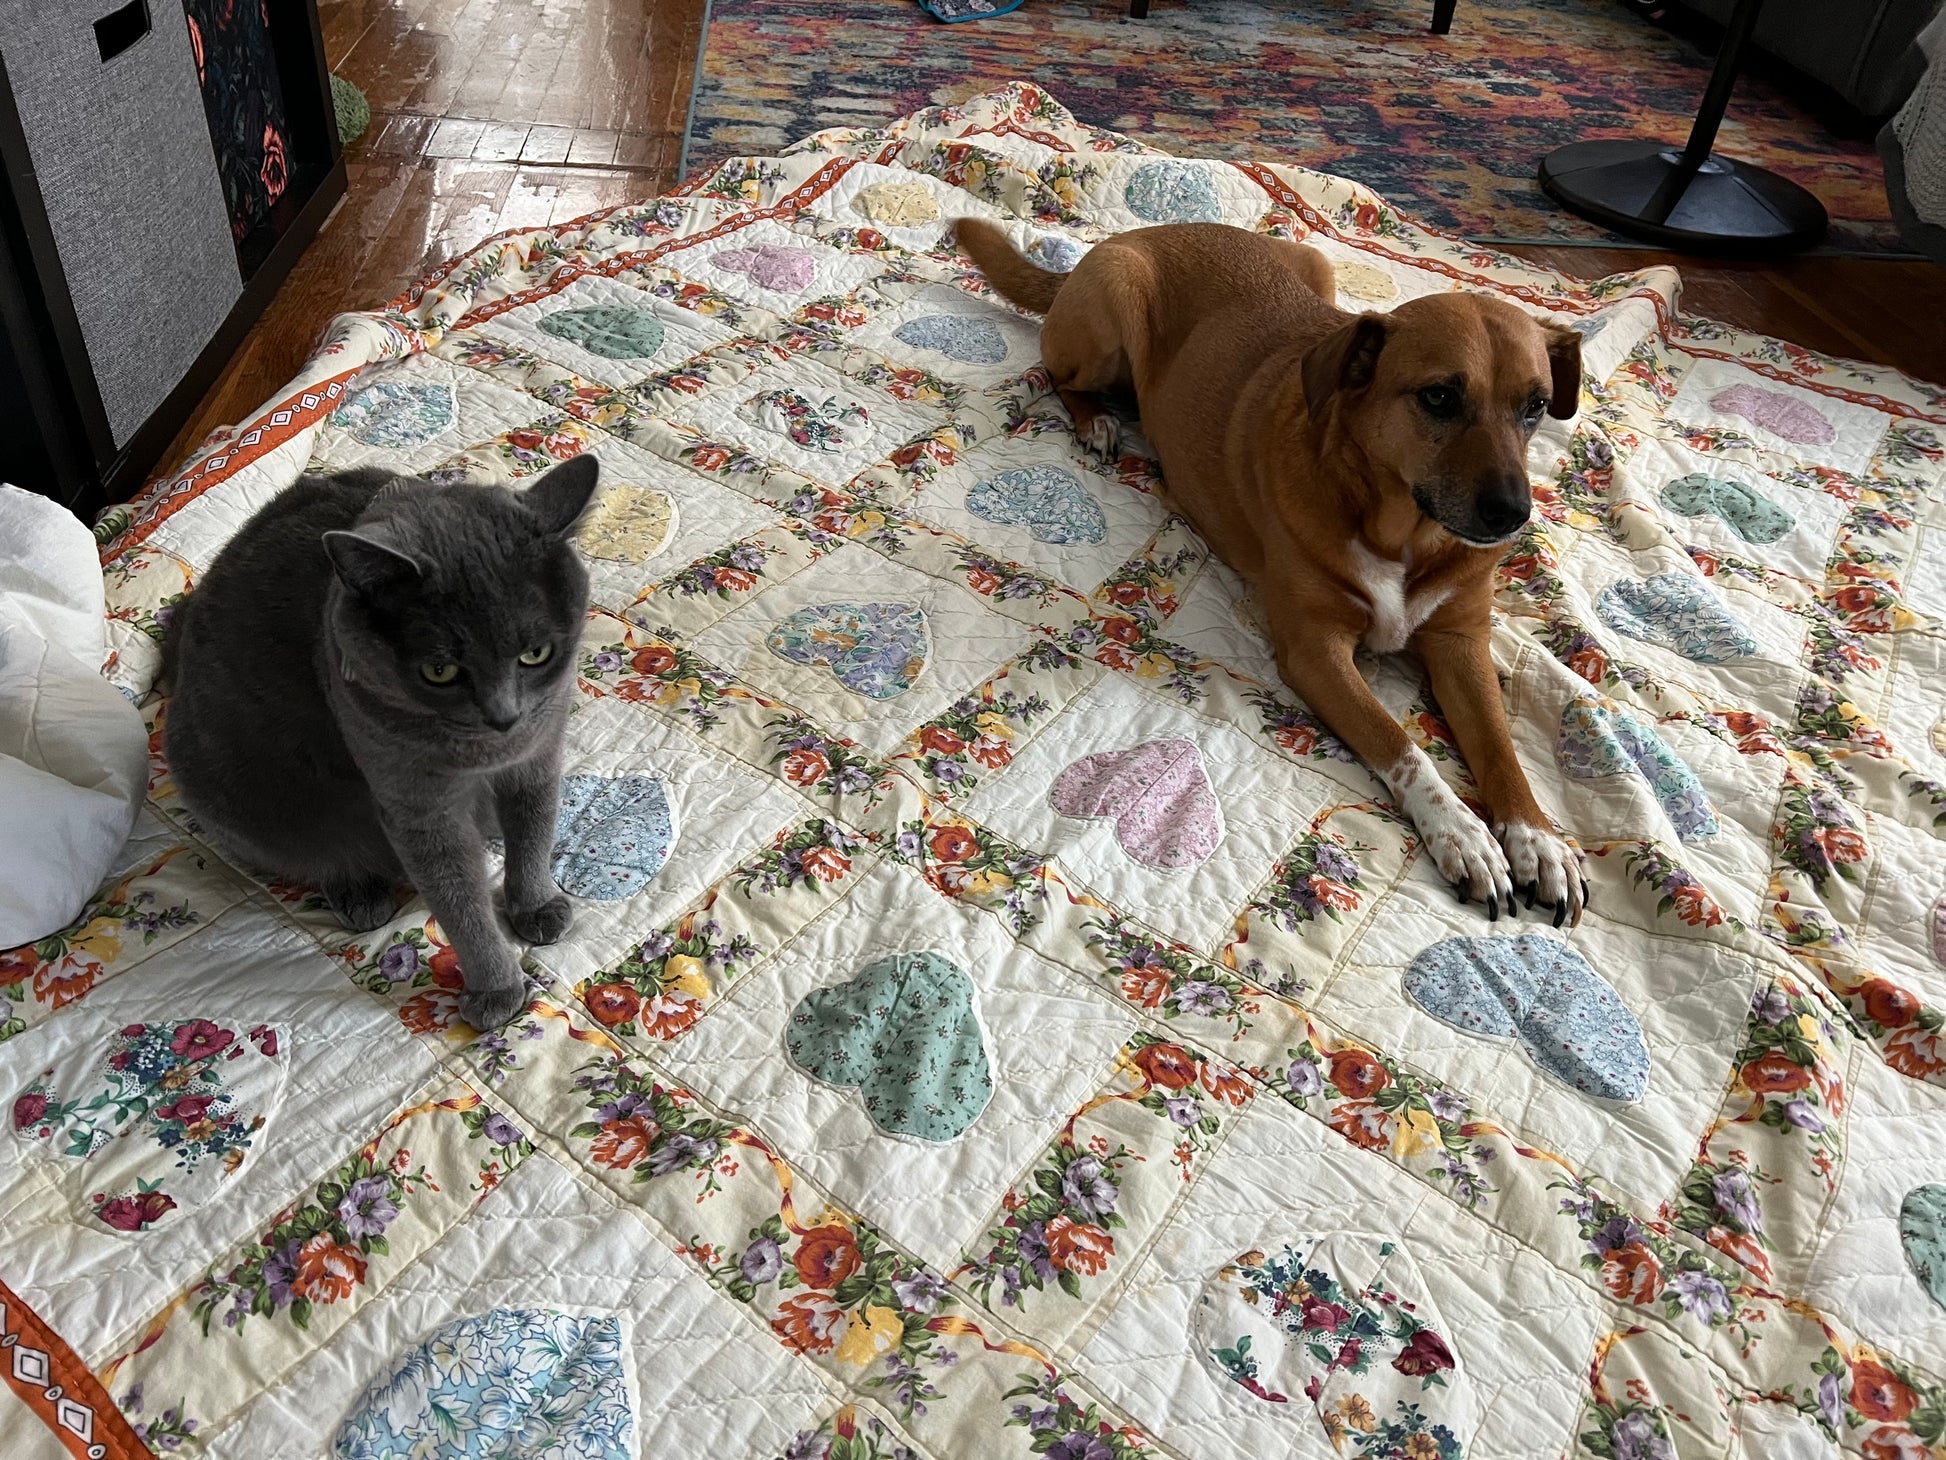 a cute dog and a grey cat are on top of the quilt, looking quite comfy